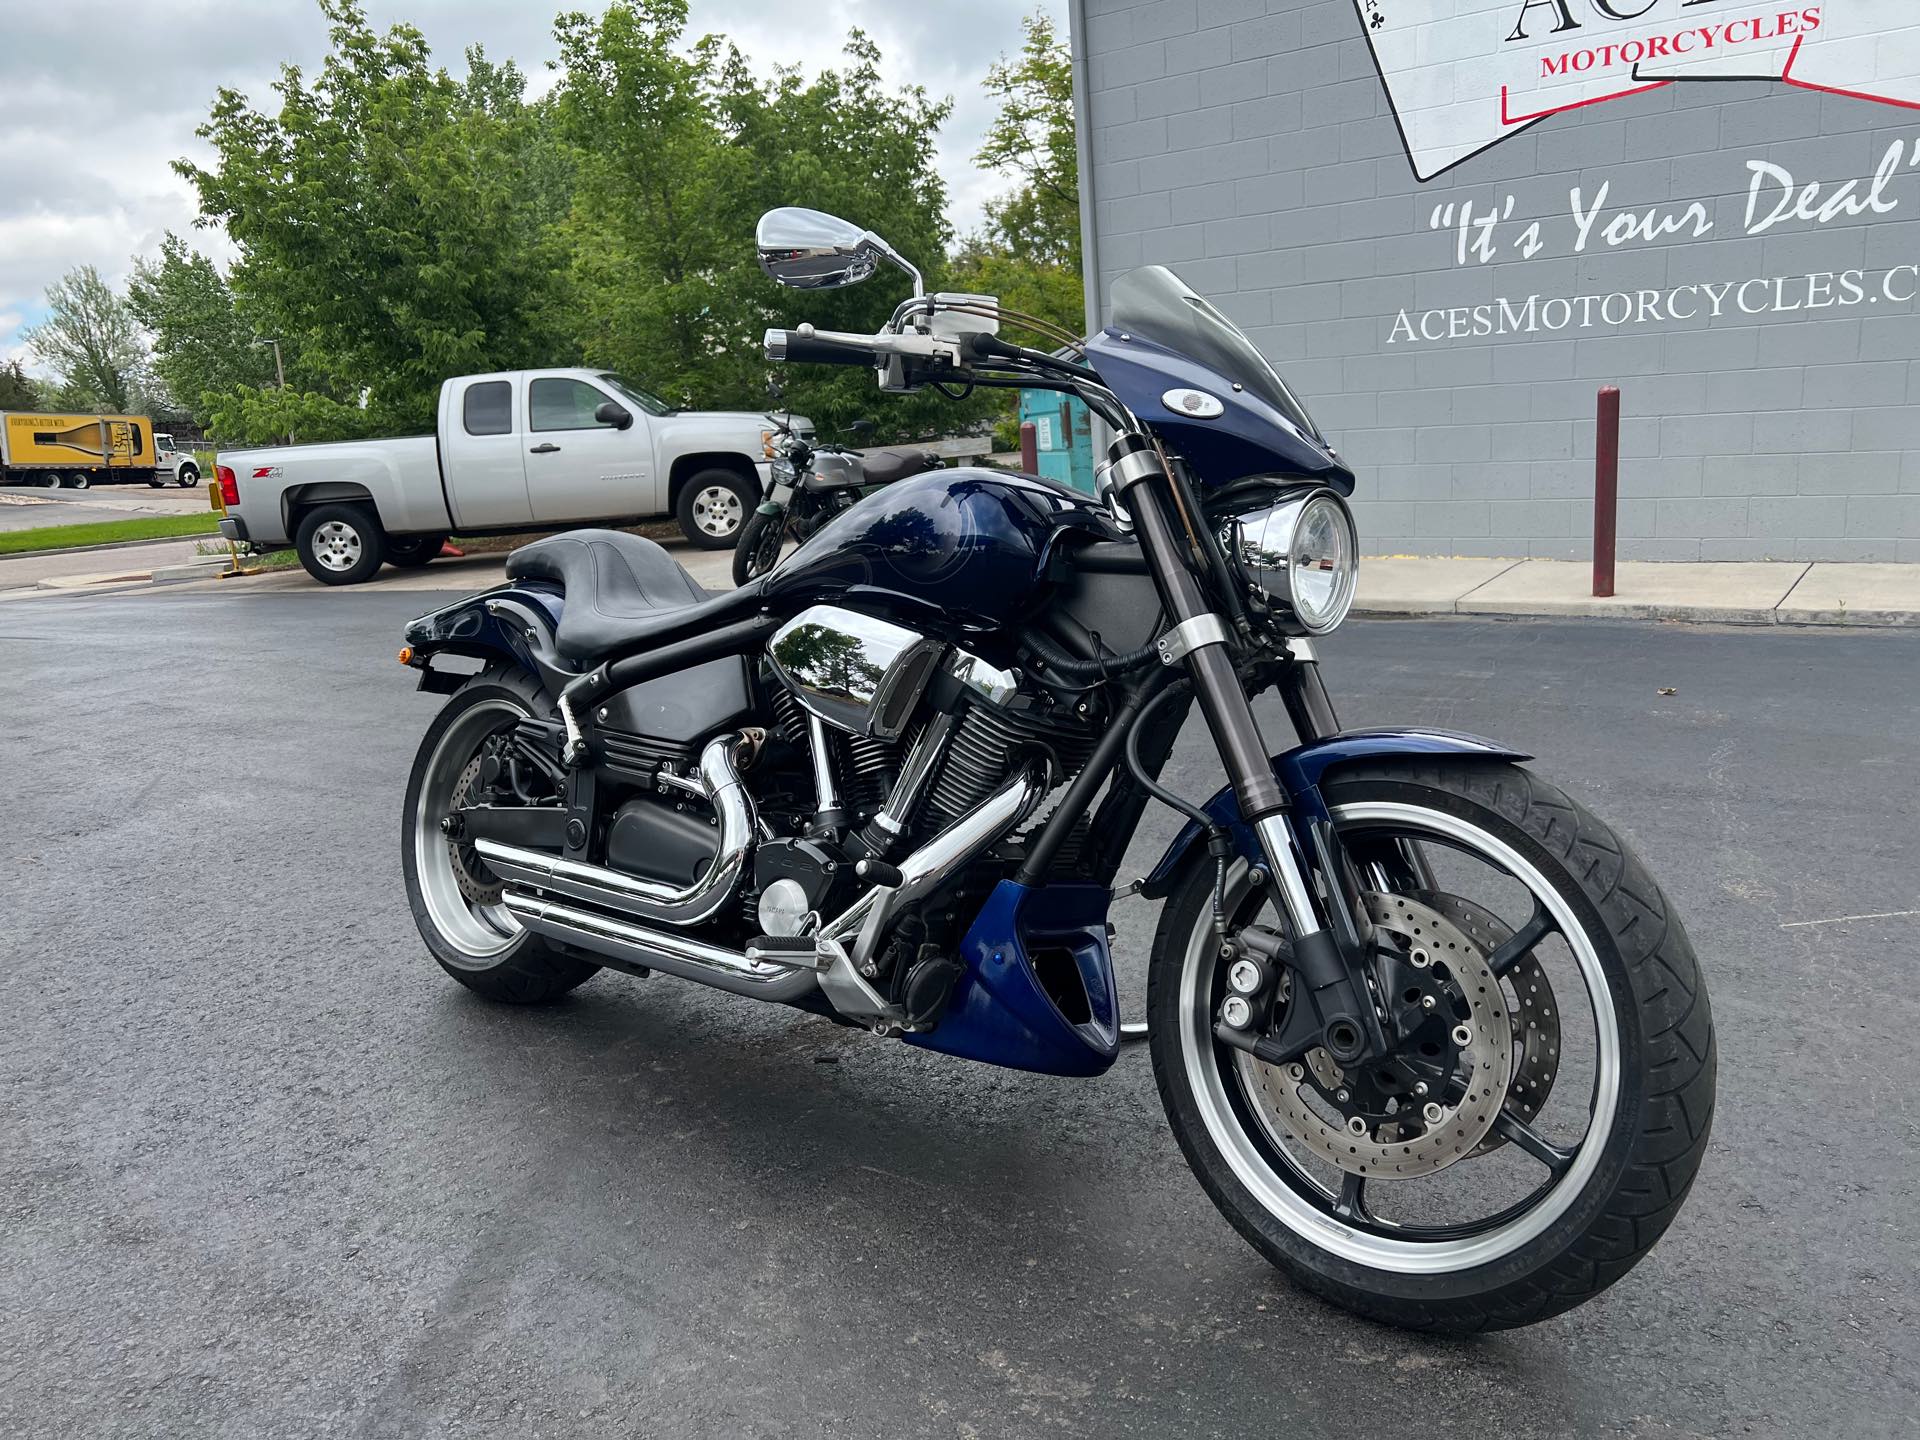 2006 Yamaha Warrior Base at Aces Motorcycles - Fort Collins